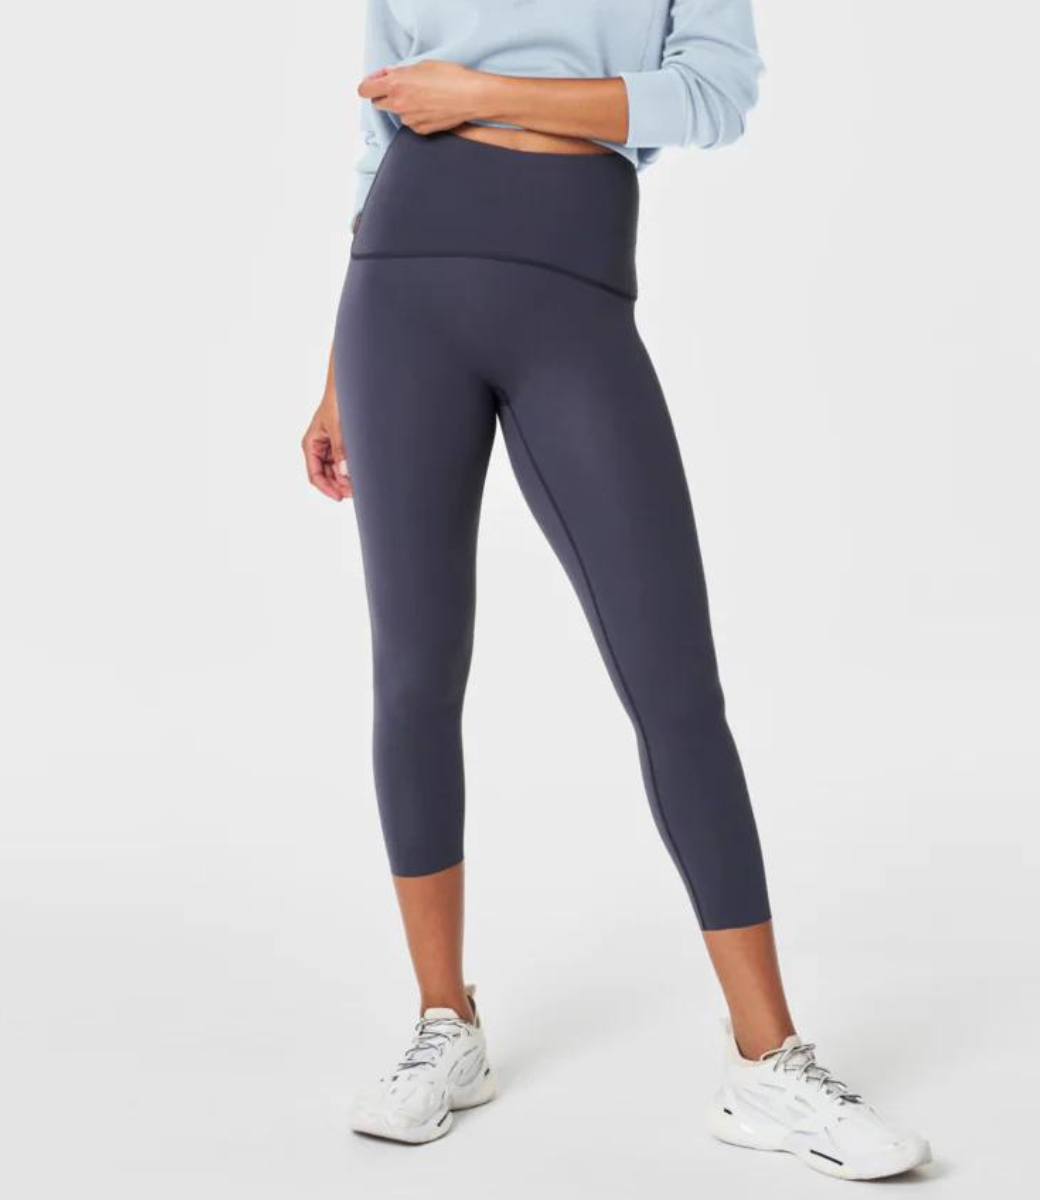 Spanx Booty Boost Active 7/8 Leggings Navy Reptile